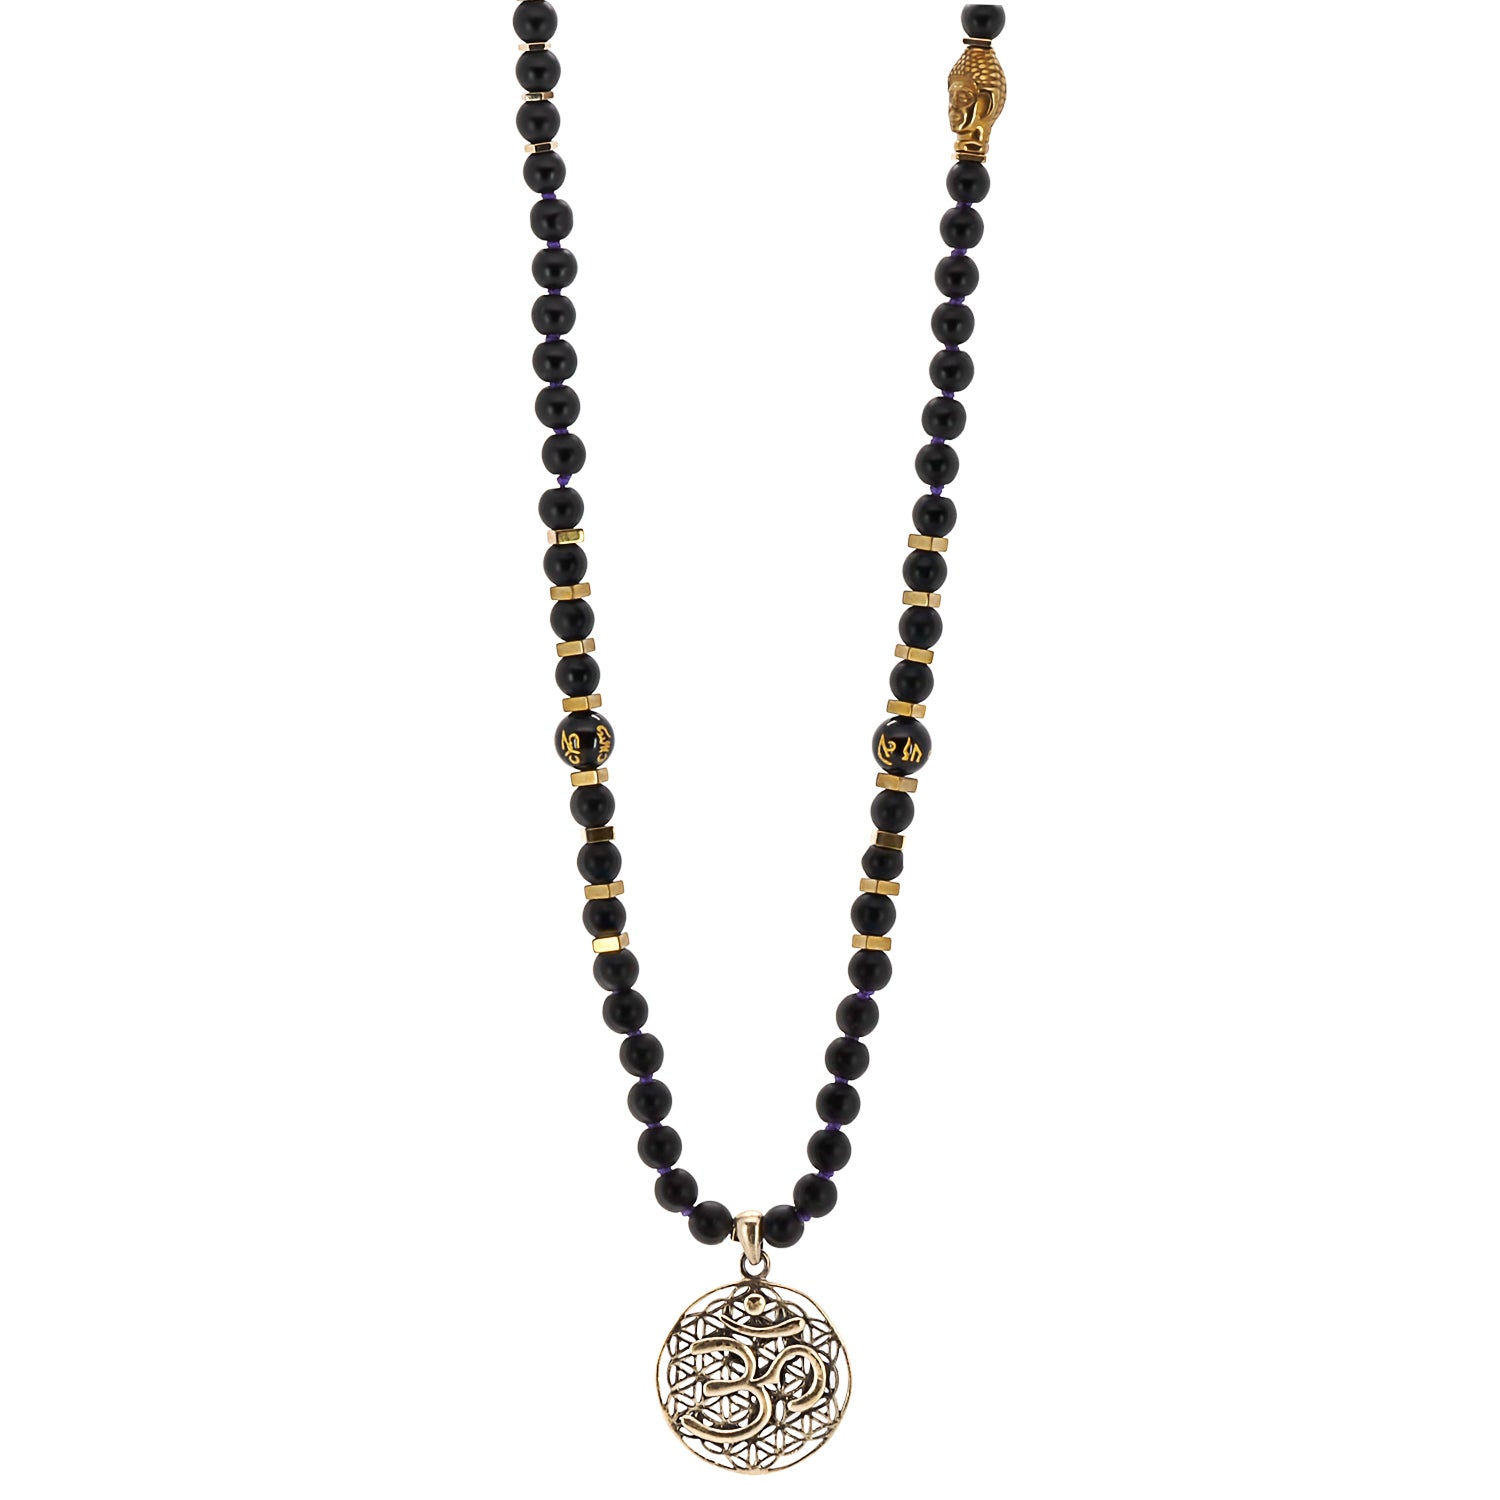 The Spiritual Yoga Mala Onyx Necklace, a beautiful and meaningful accessory for spiritual seekers